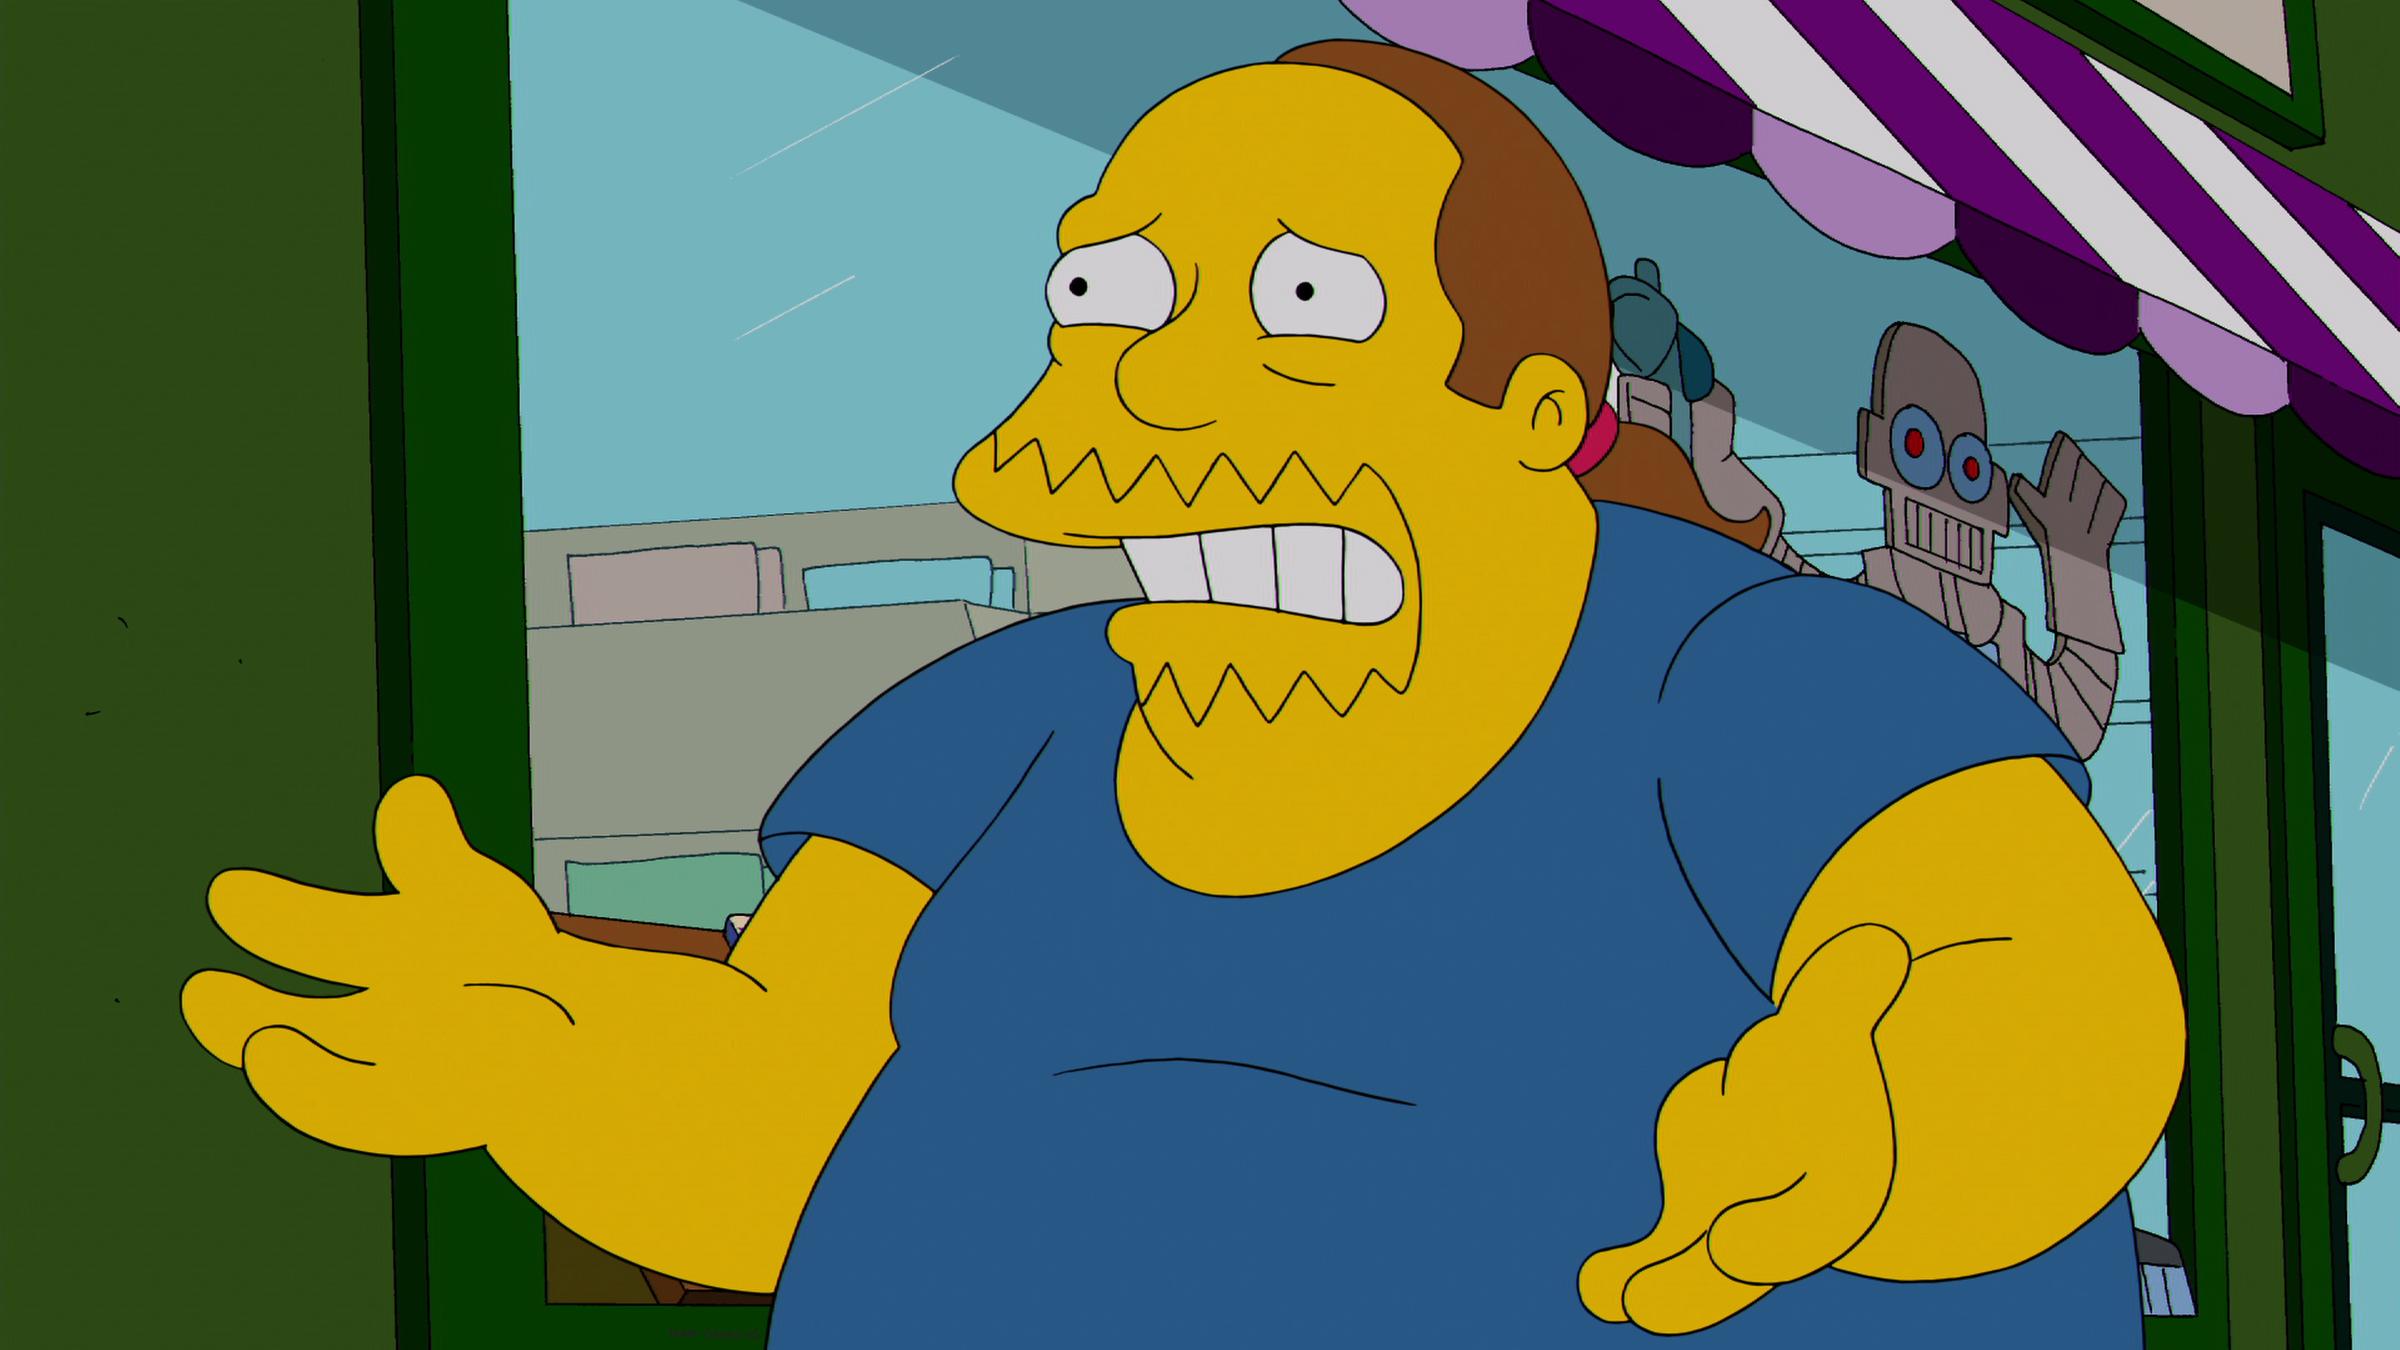 Comic Book Guy of The Simpsons